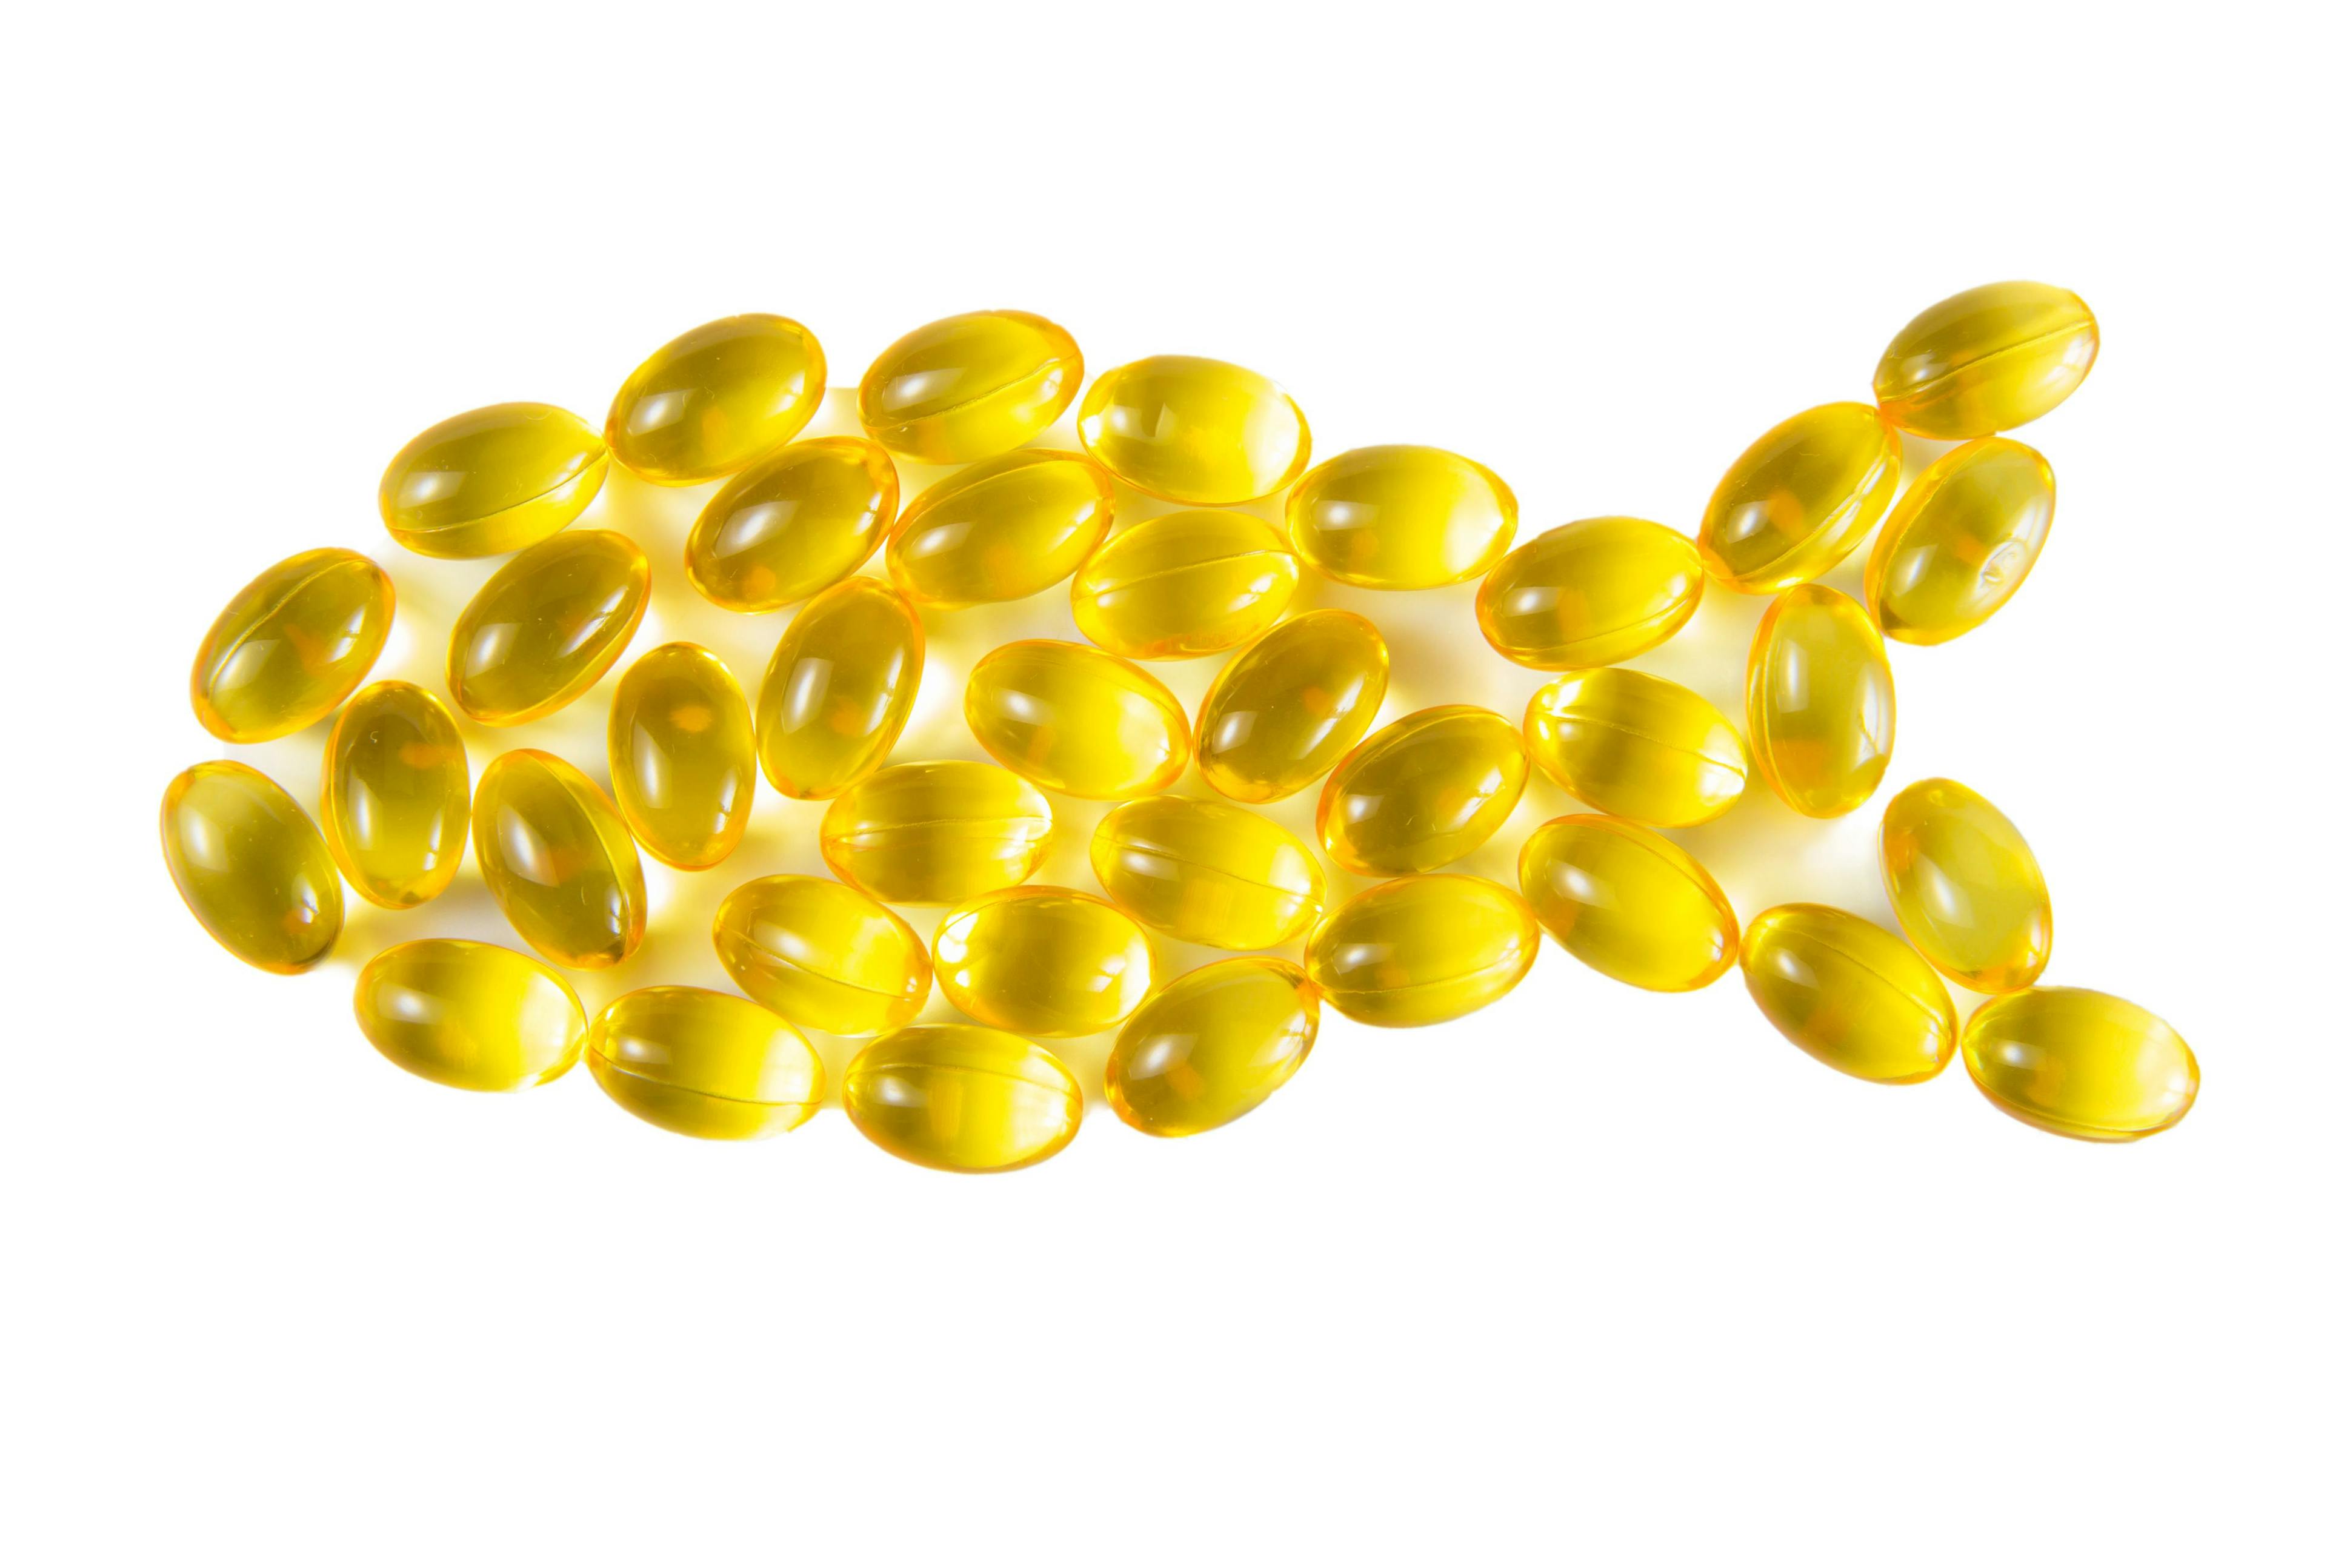 Study Results Show Low Vitamin D Levels in Young Individuals of Color